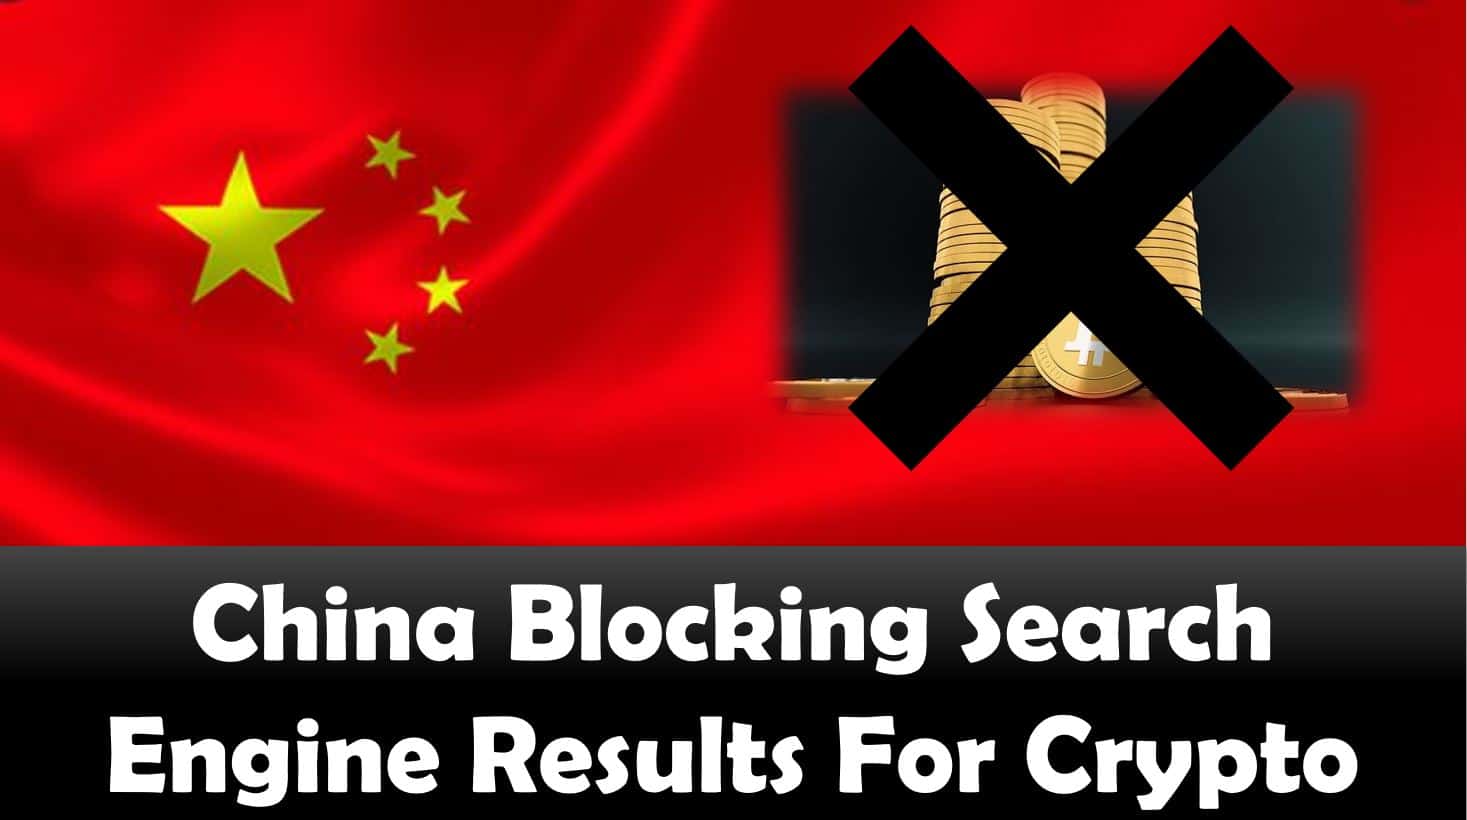 China Blocking Search Engine Results For Crypto